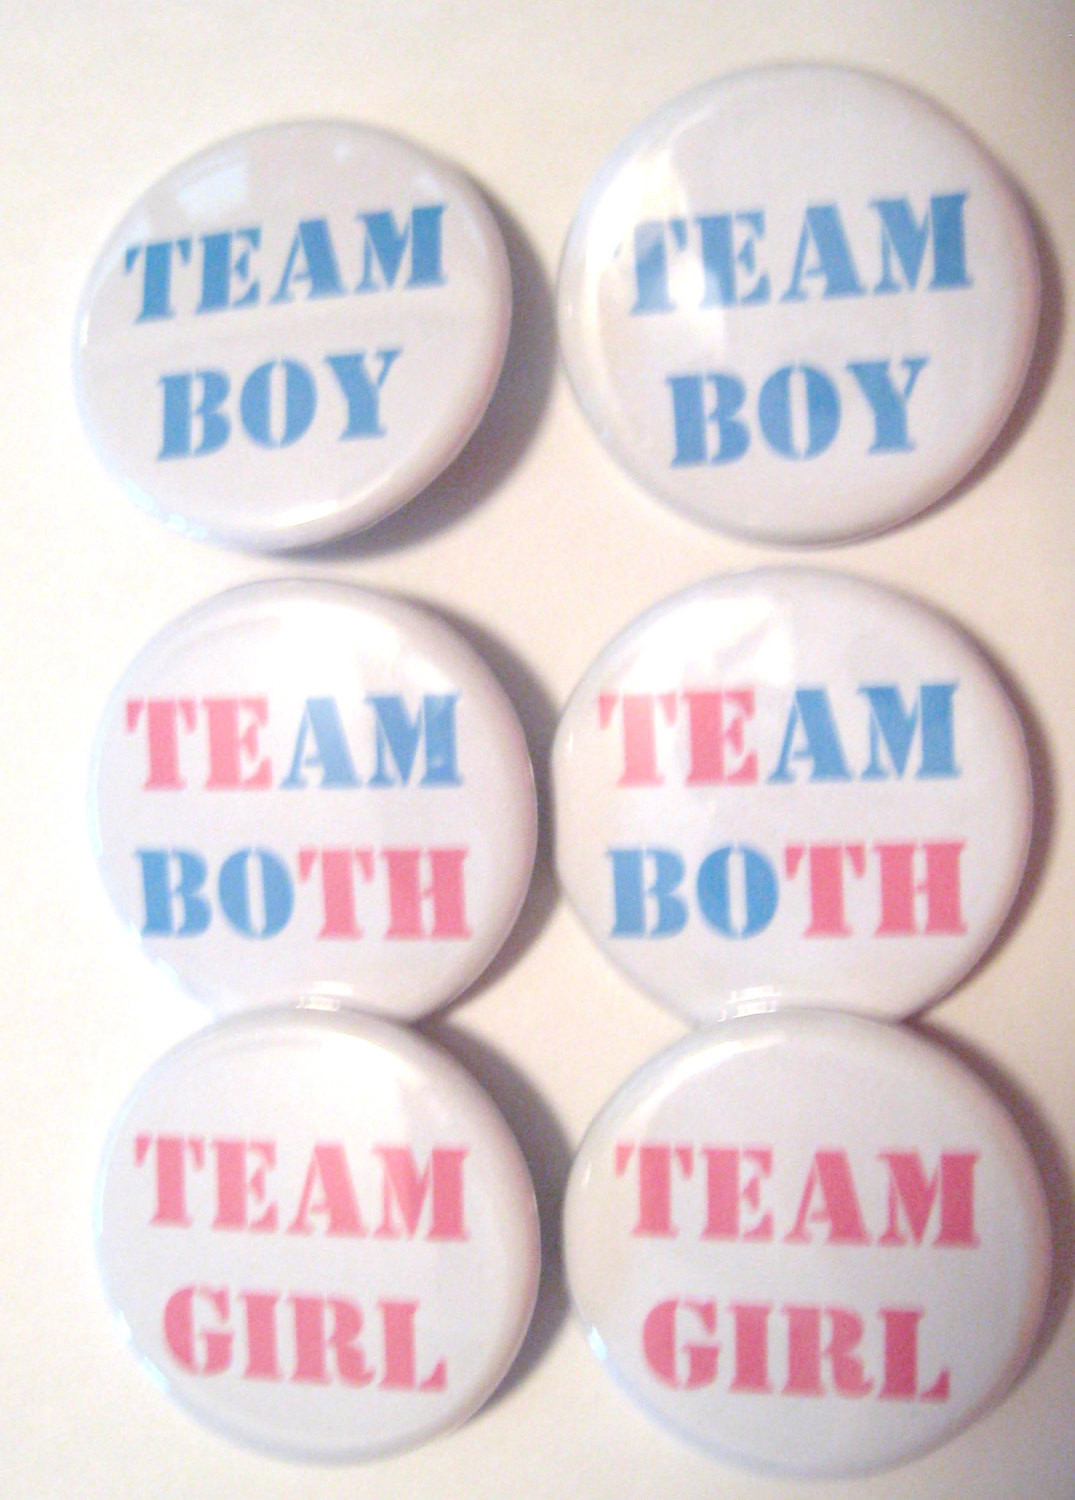 Gender Reveal Party Ideas Twins
 Twins Gender Reveal Party Team Boy Team Girl by